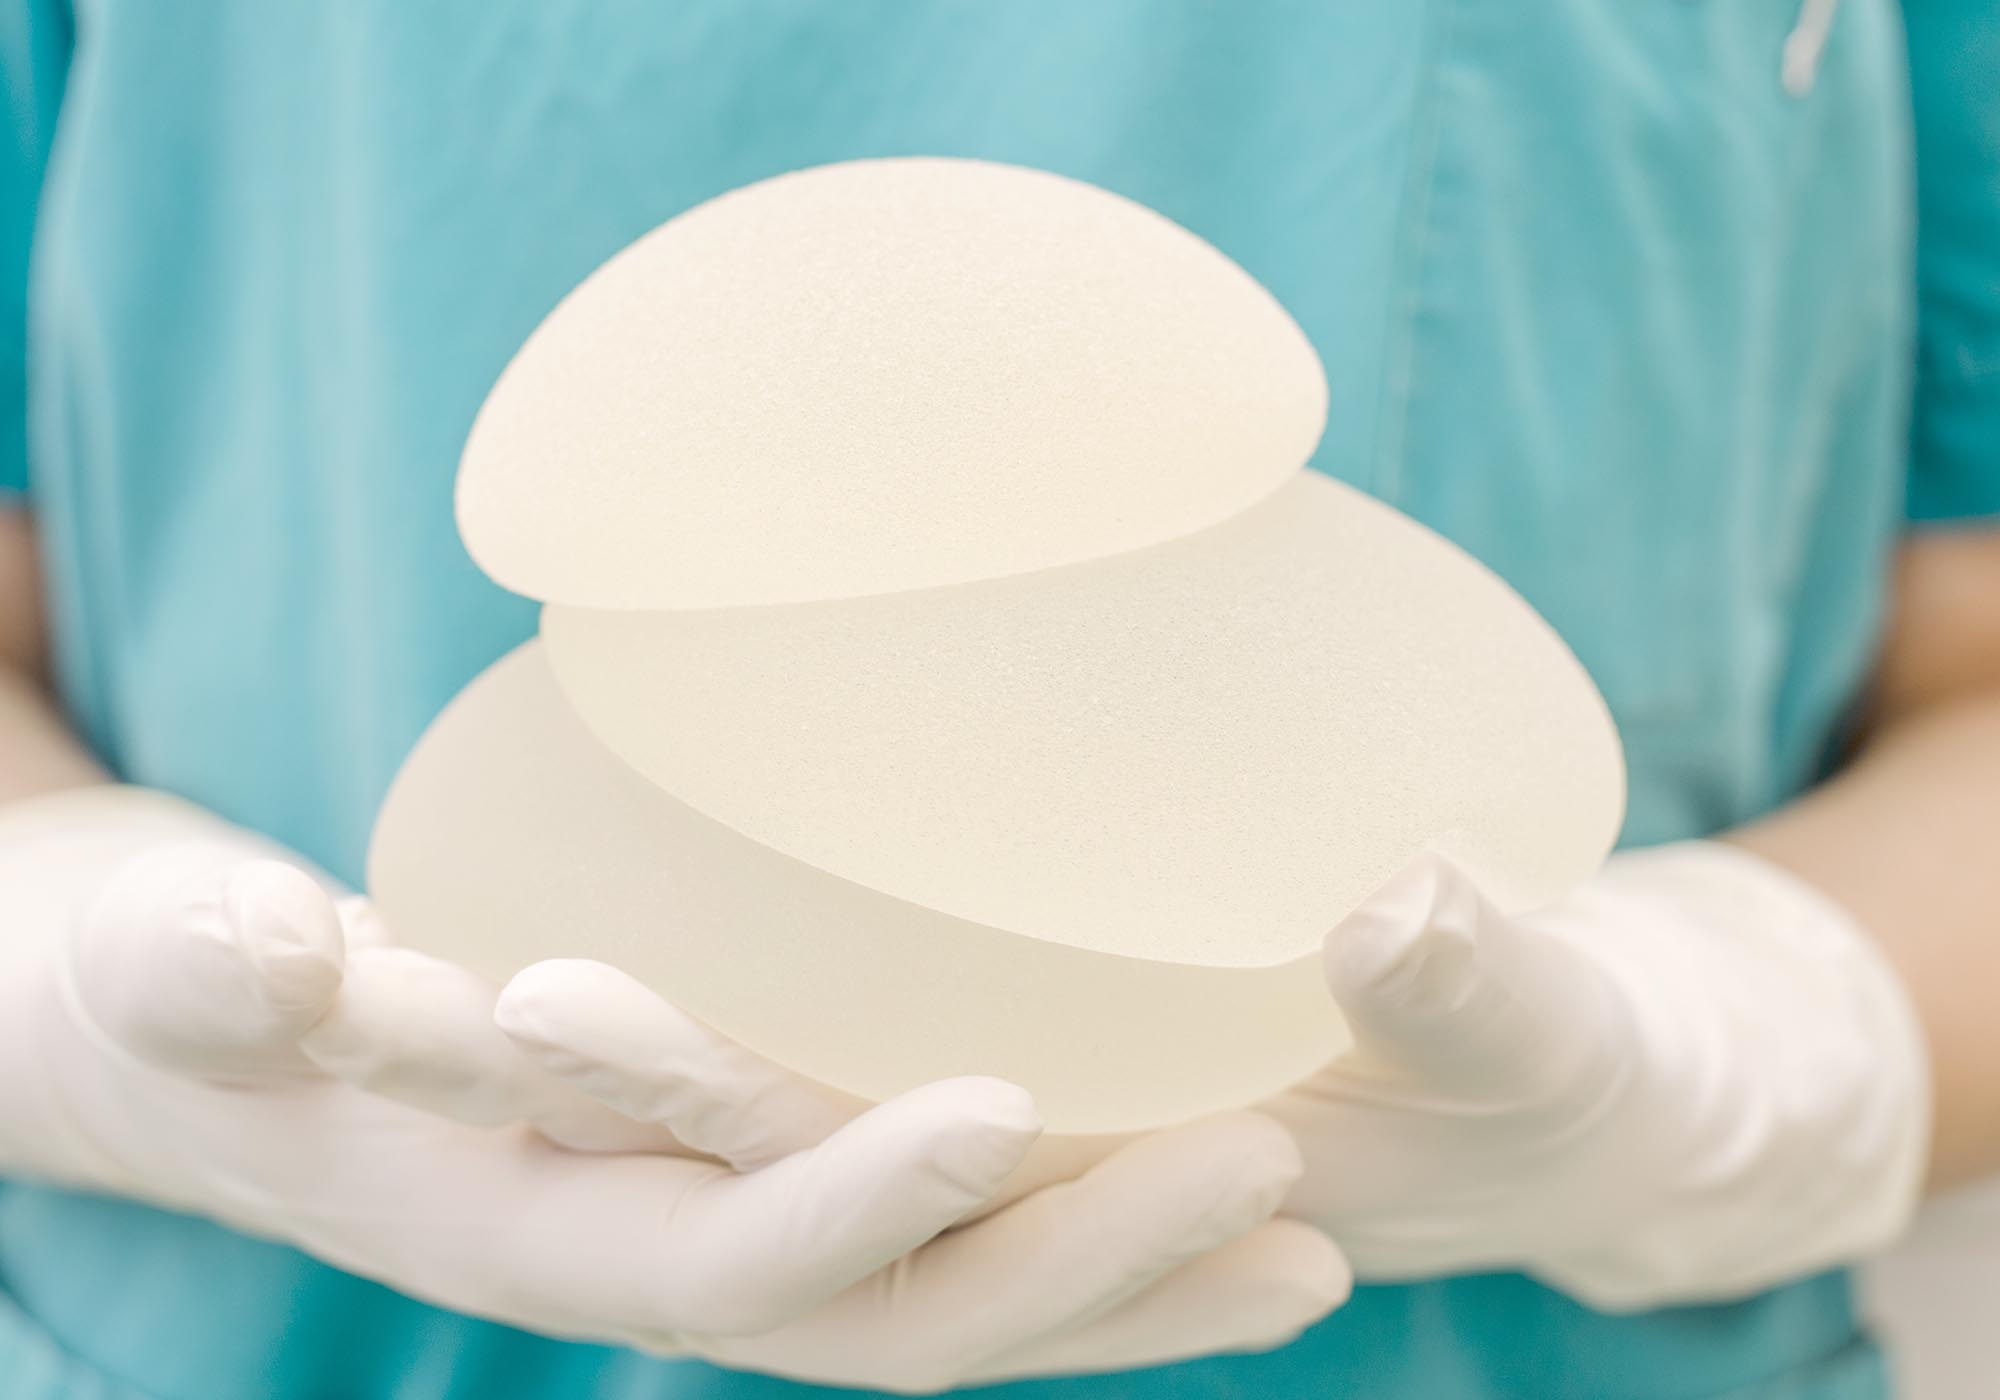 What’s the best way to determine how big you should go? Ahead, five things to keep in mind when choosing the size of your breast implants.